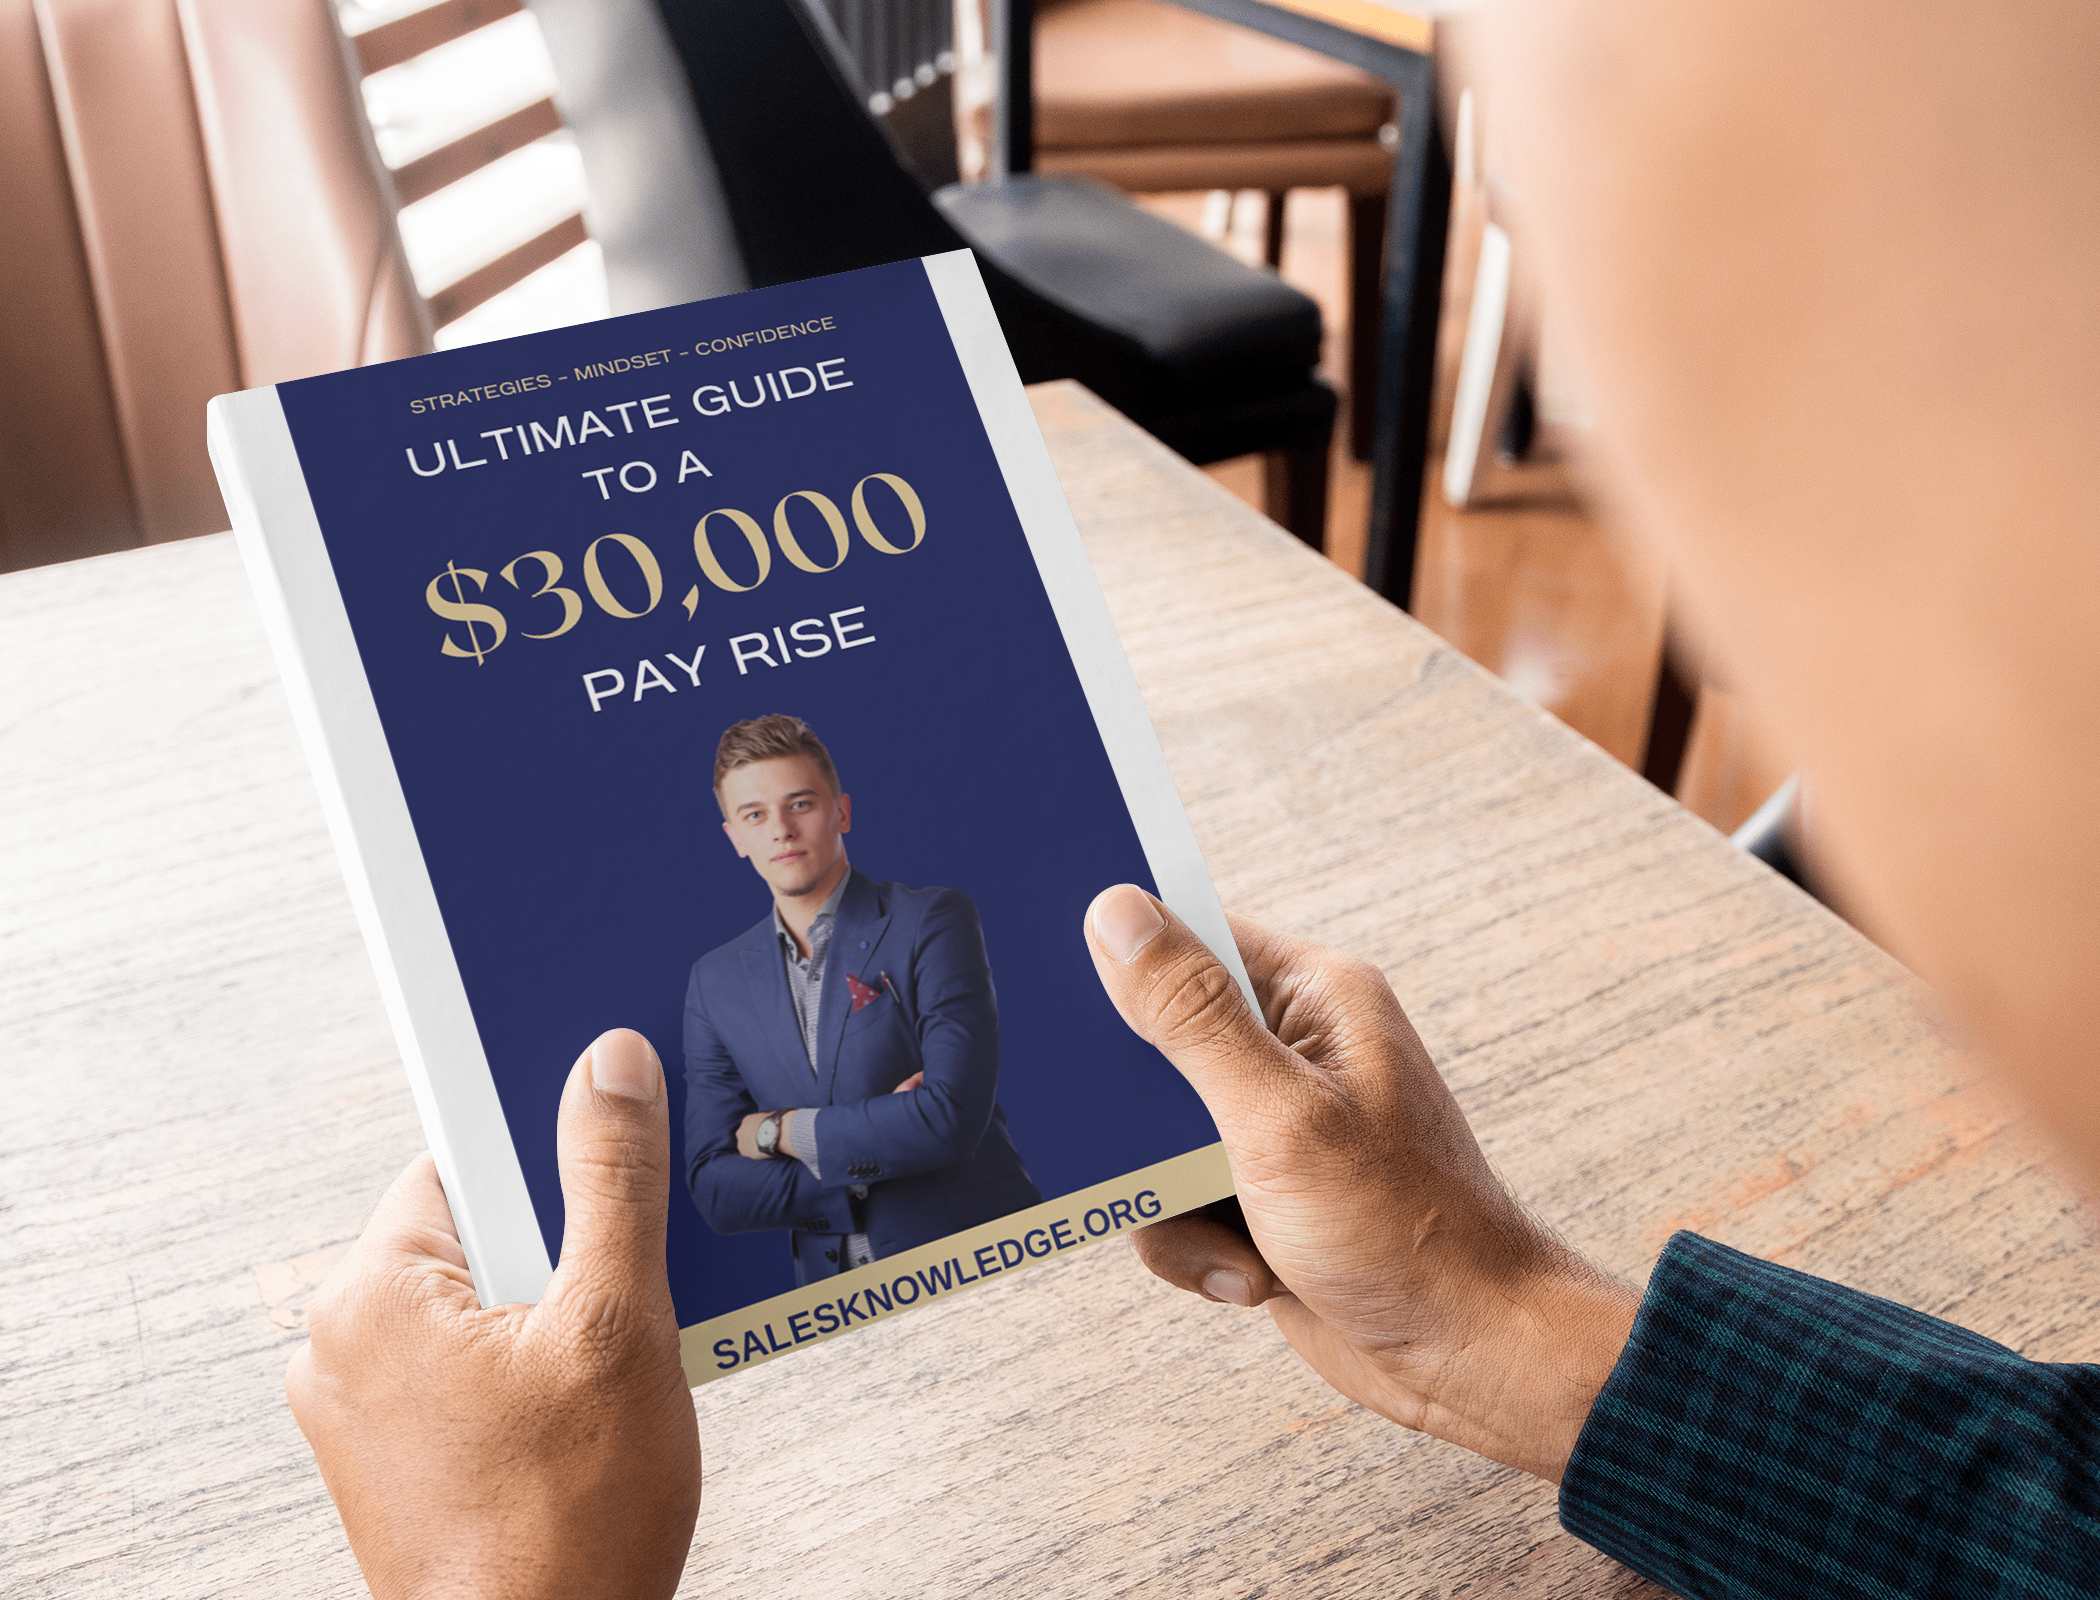 Ultimate Guide to a $30,000 Pay Rise - FREE COACHING CALL INCLUDED